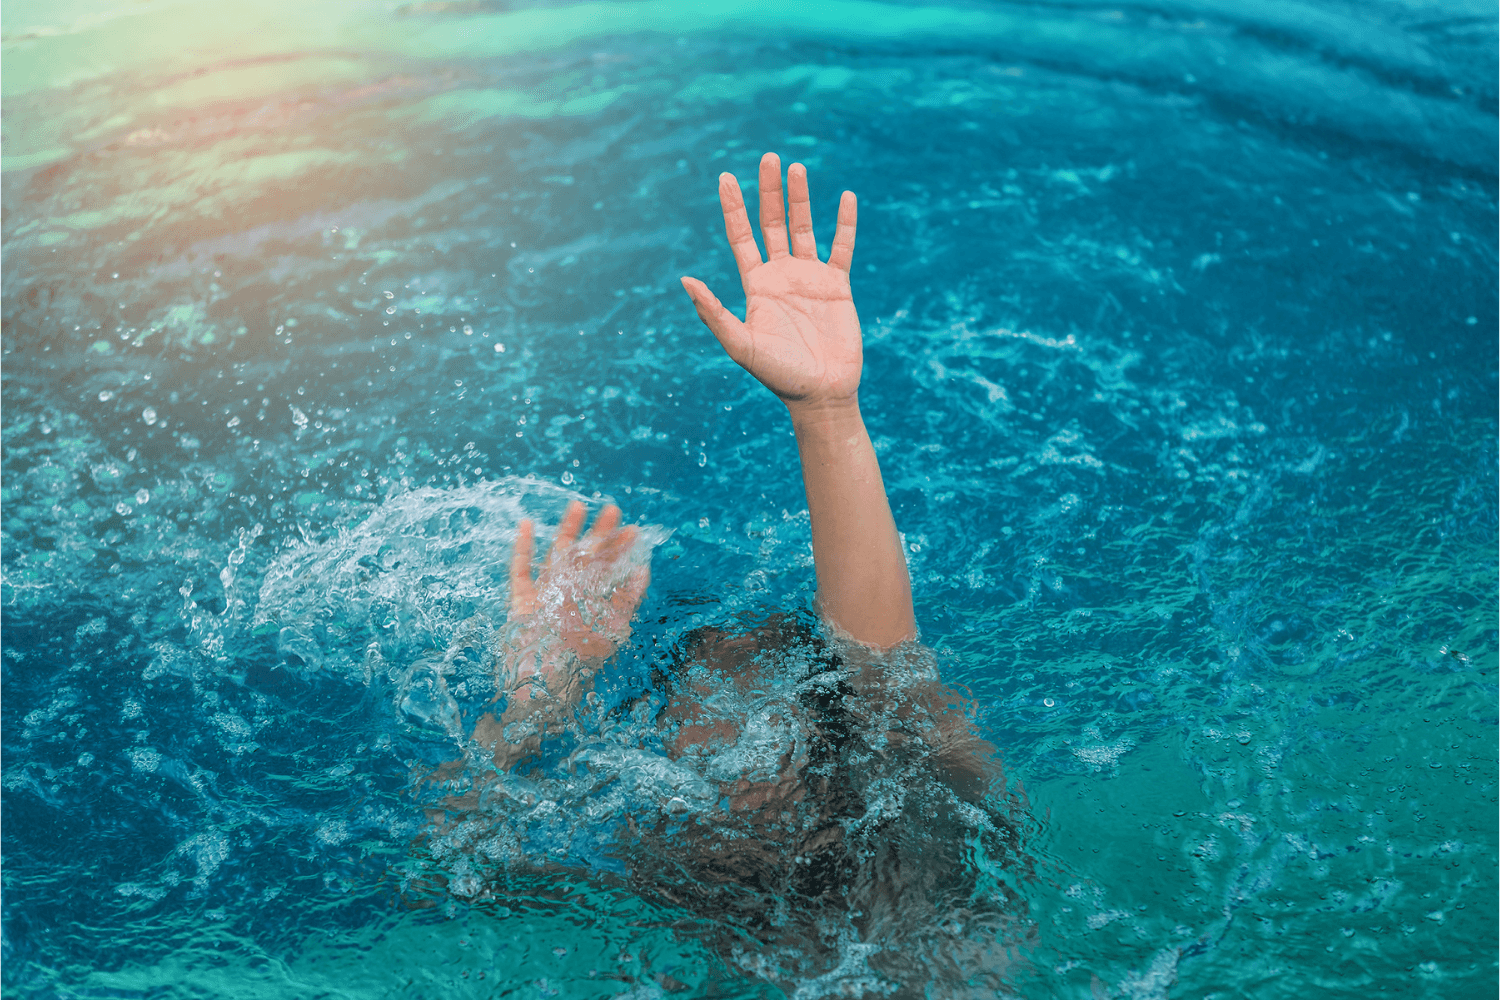 Swimmer underwater showing clear signs of distress with their arms above water